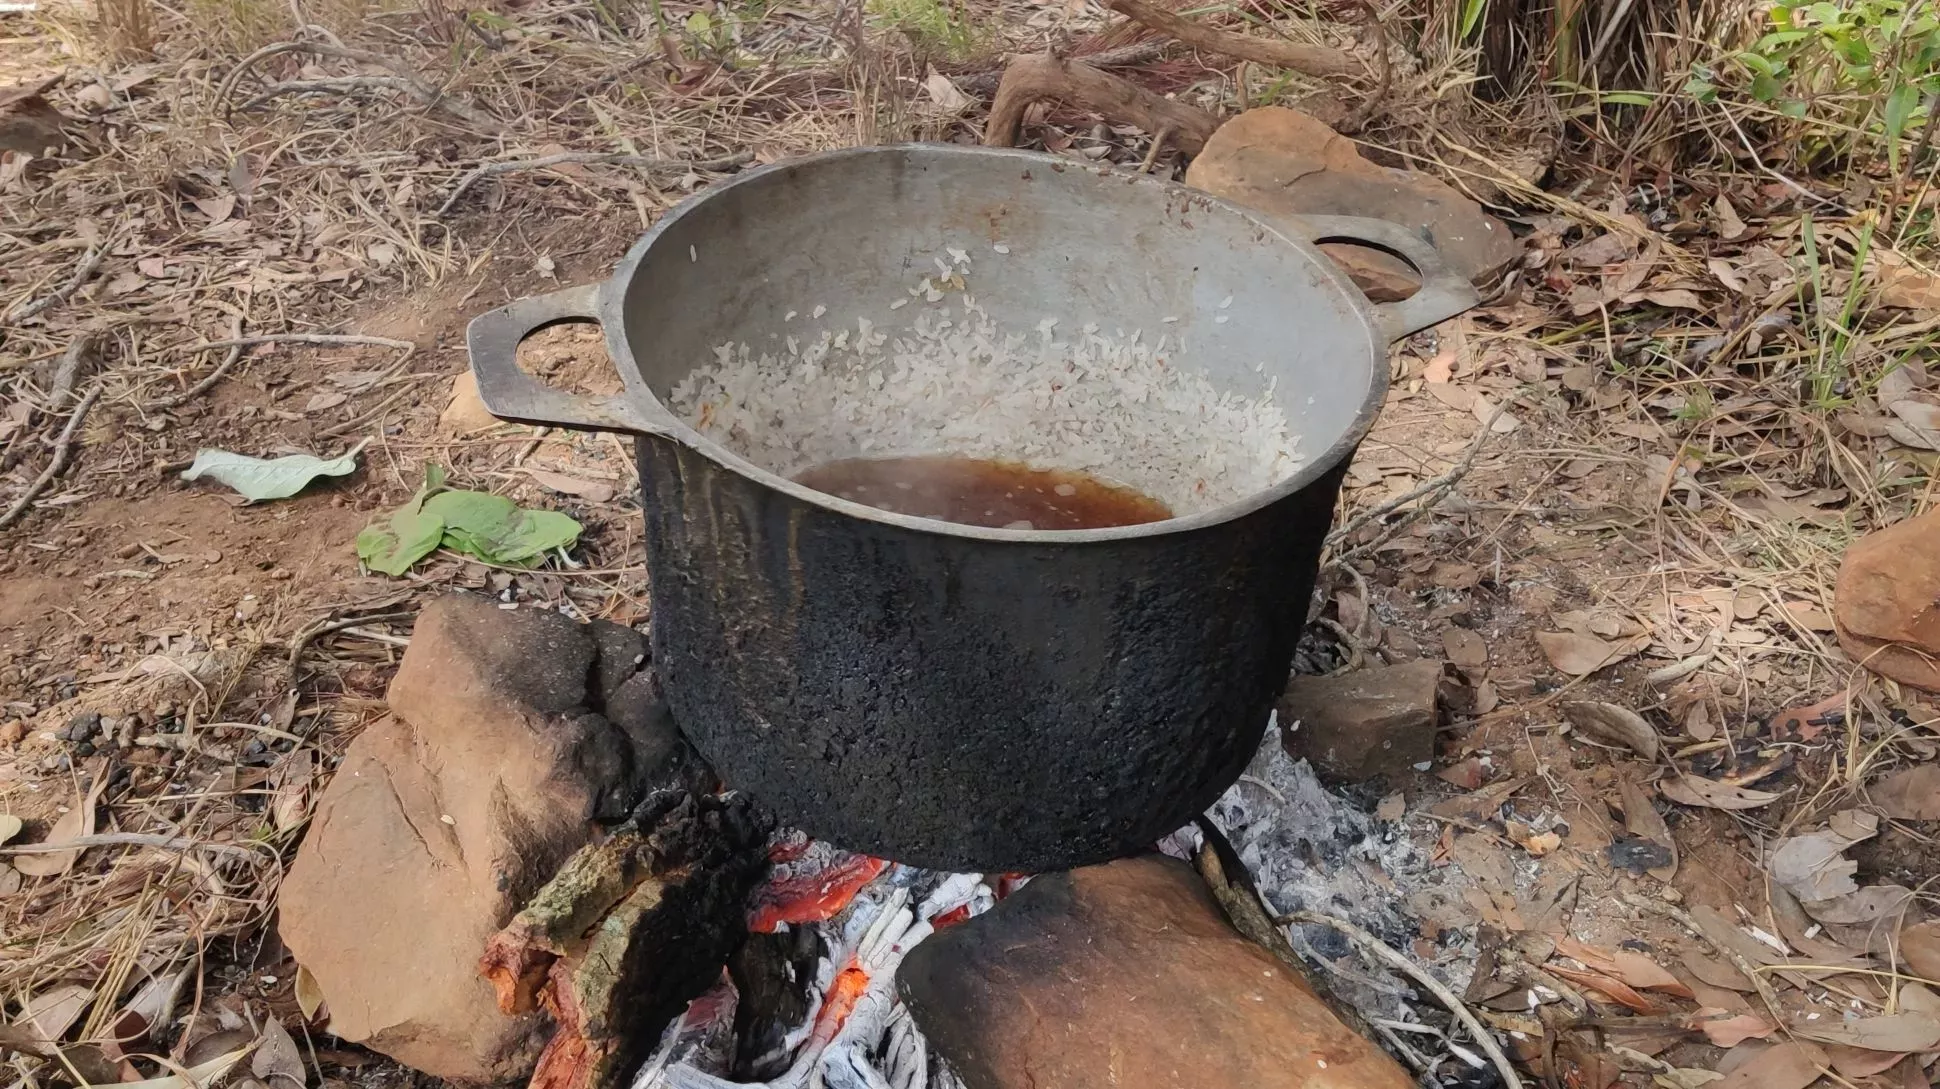 A metal pot on a campfire with a brown liquid at the bottom